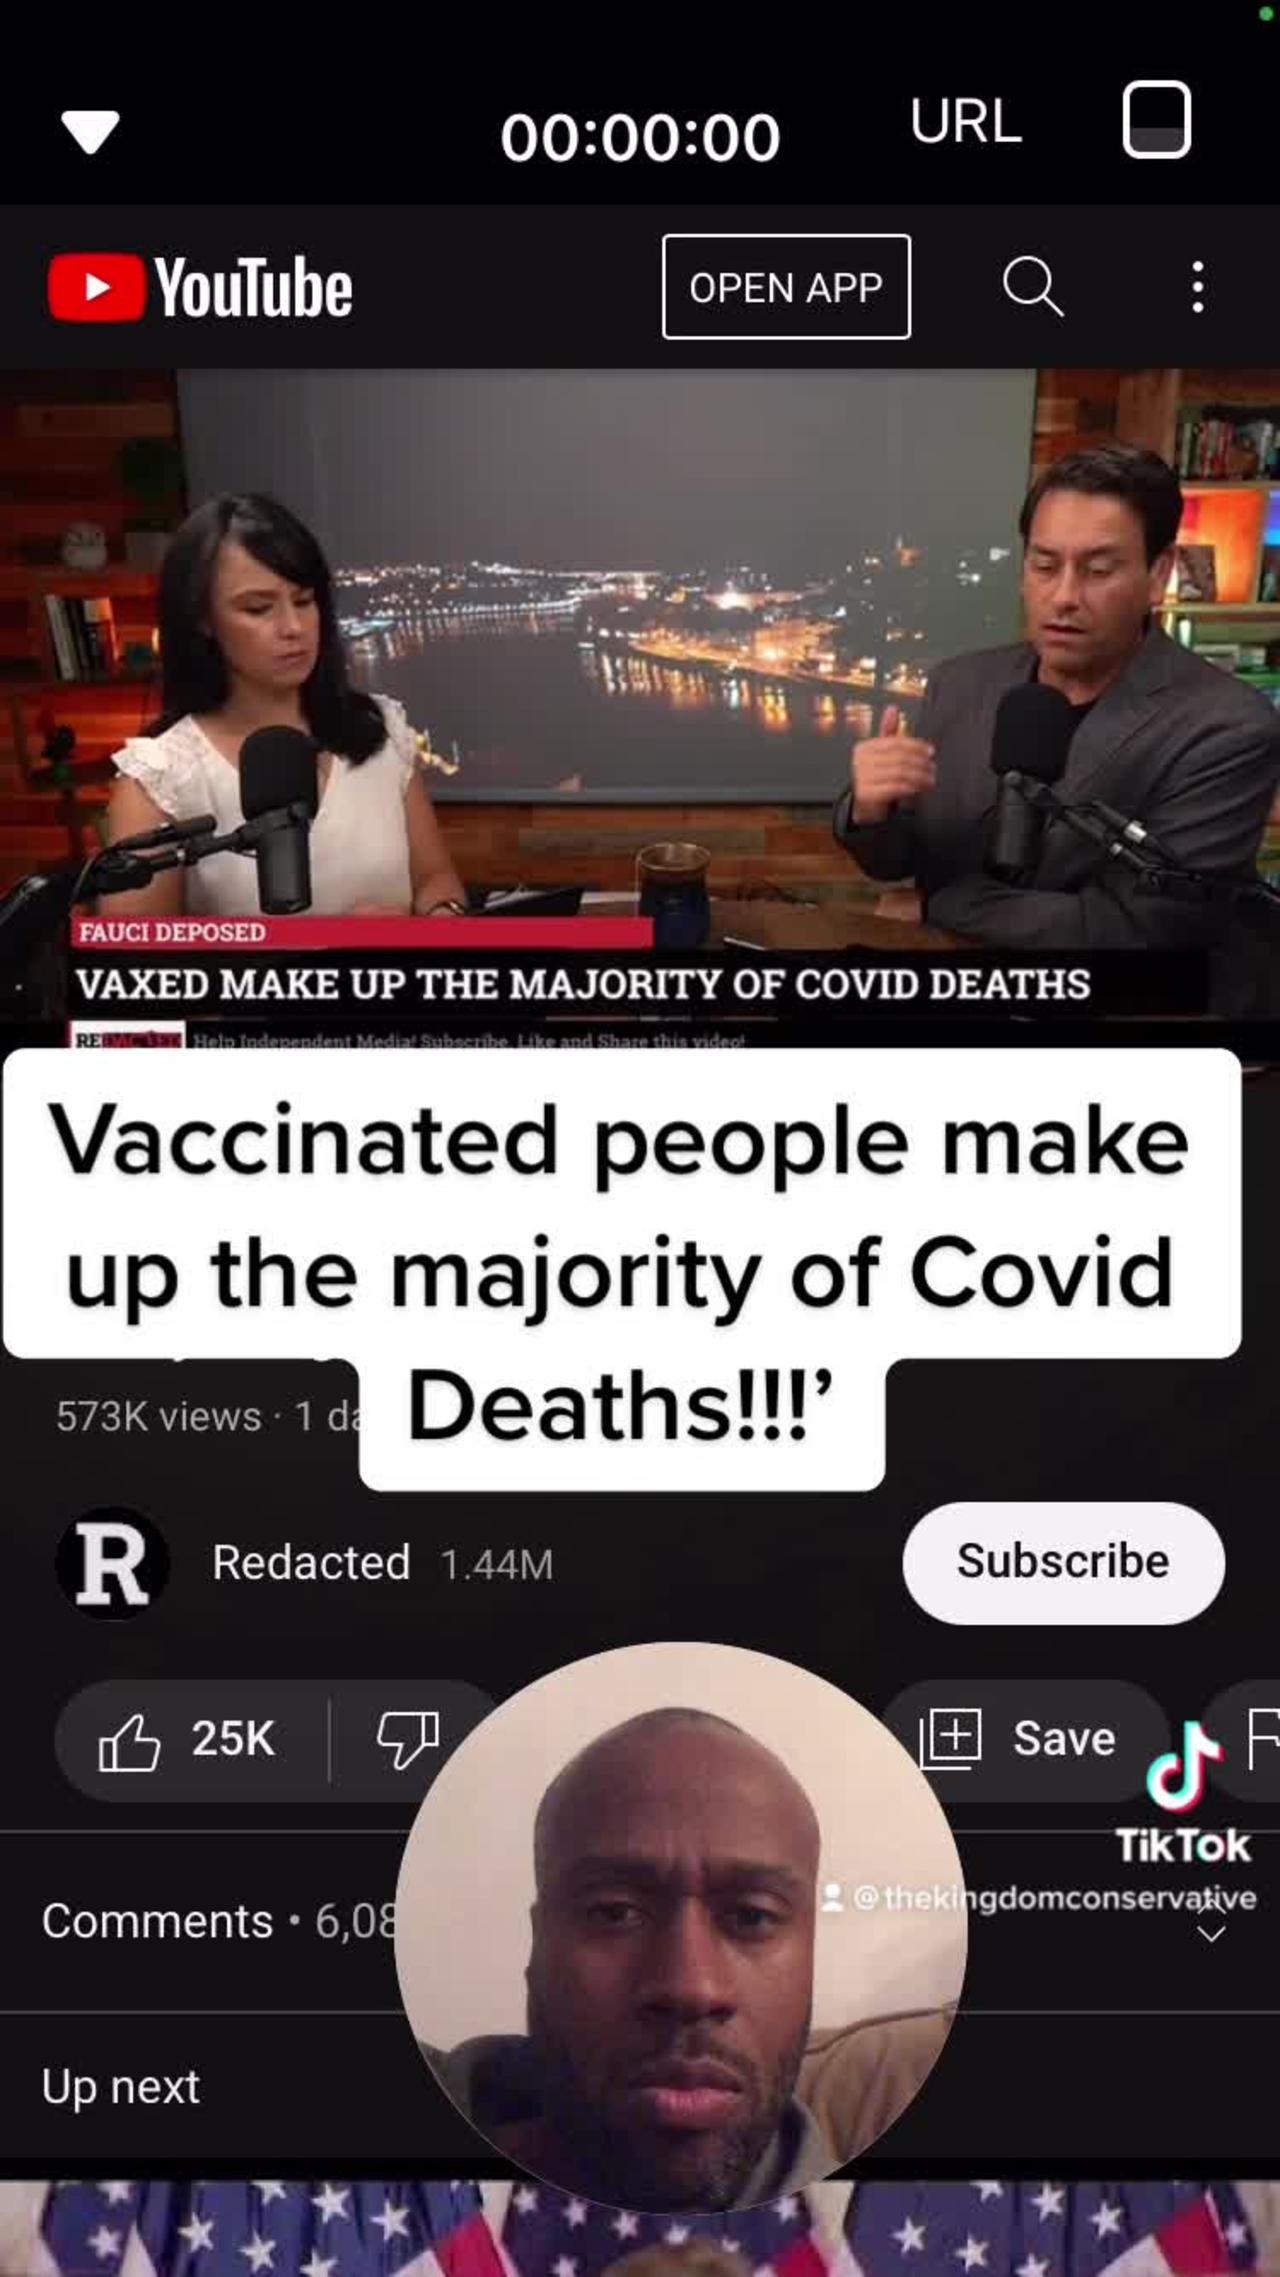 So they admit that most of the Covid deaths are from vaccinated people!!!